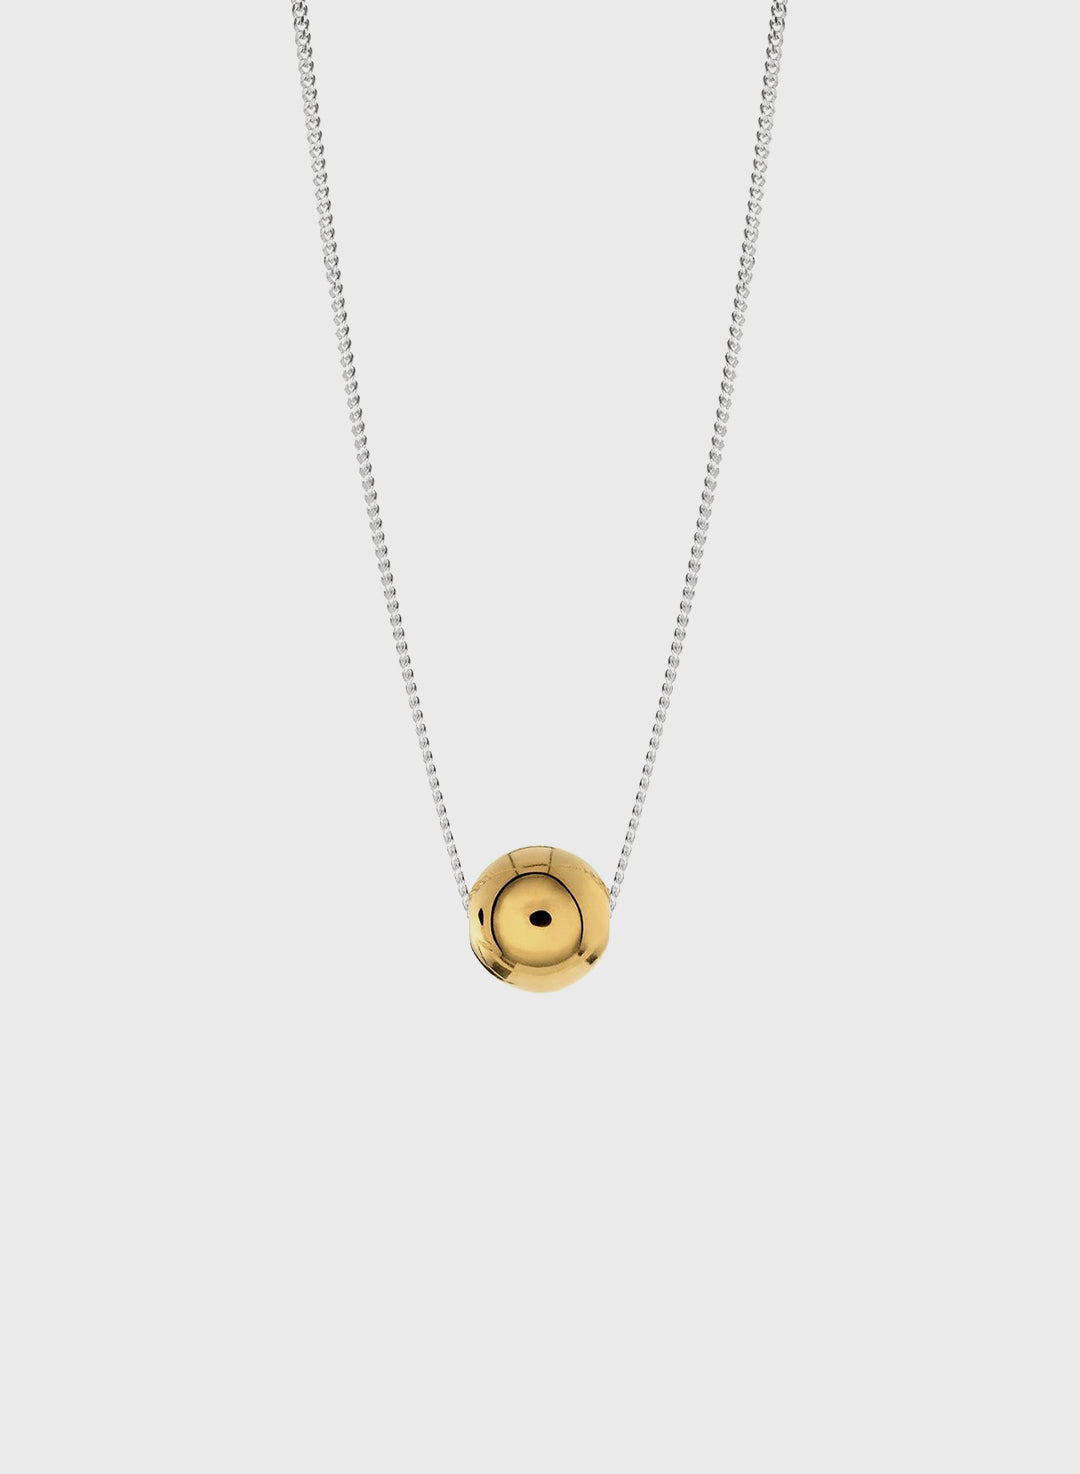 Bubble Pendant Necklace Gold Plated